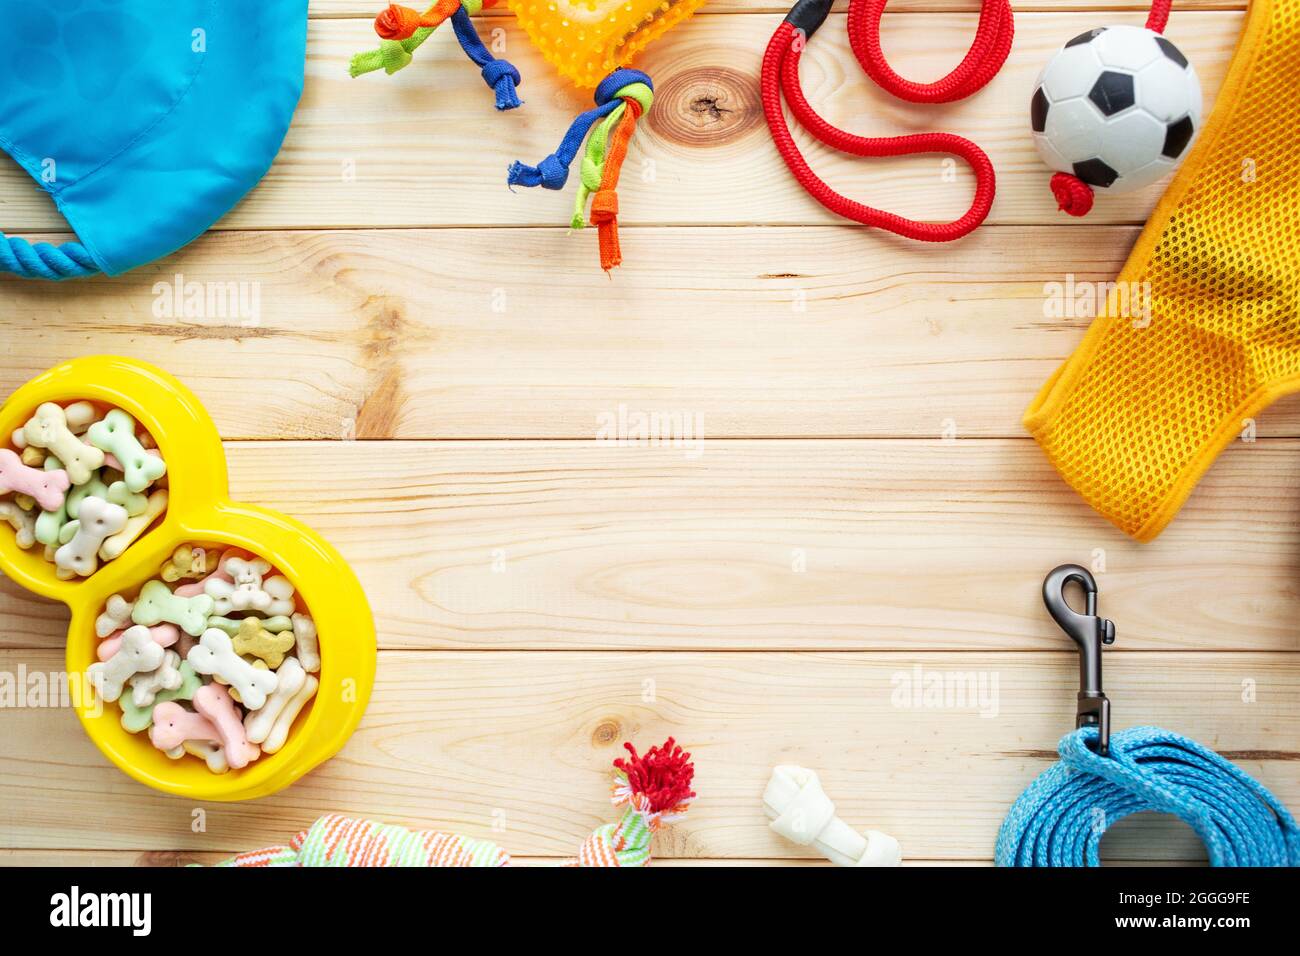 Different multicolored pet care accessories: ring, bones, balls, snacks on natural wooden background. Rubber and textile accessories for dogs. Stock Photo